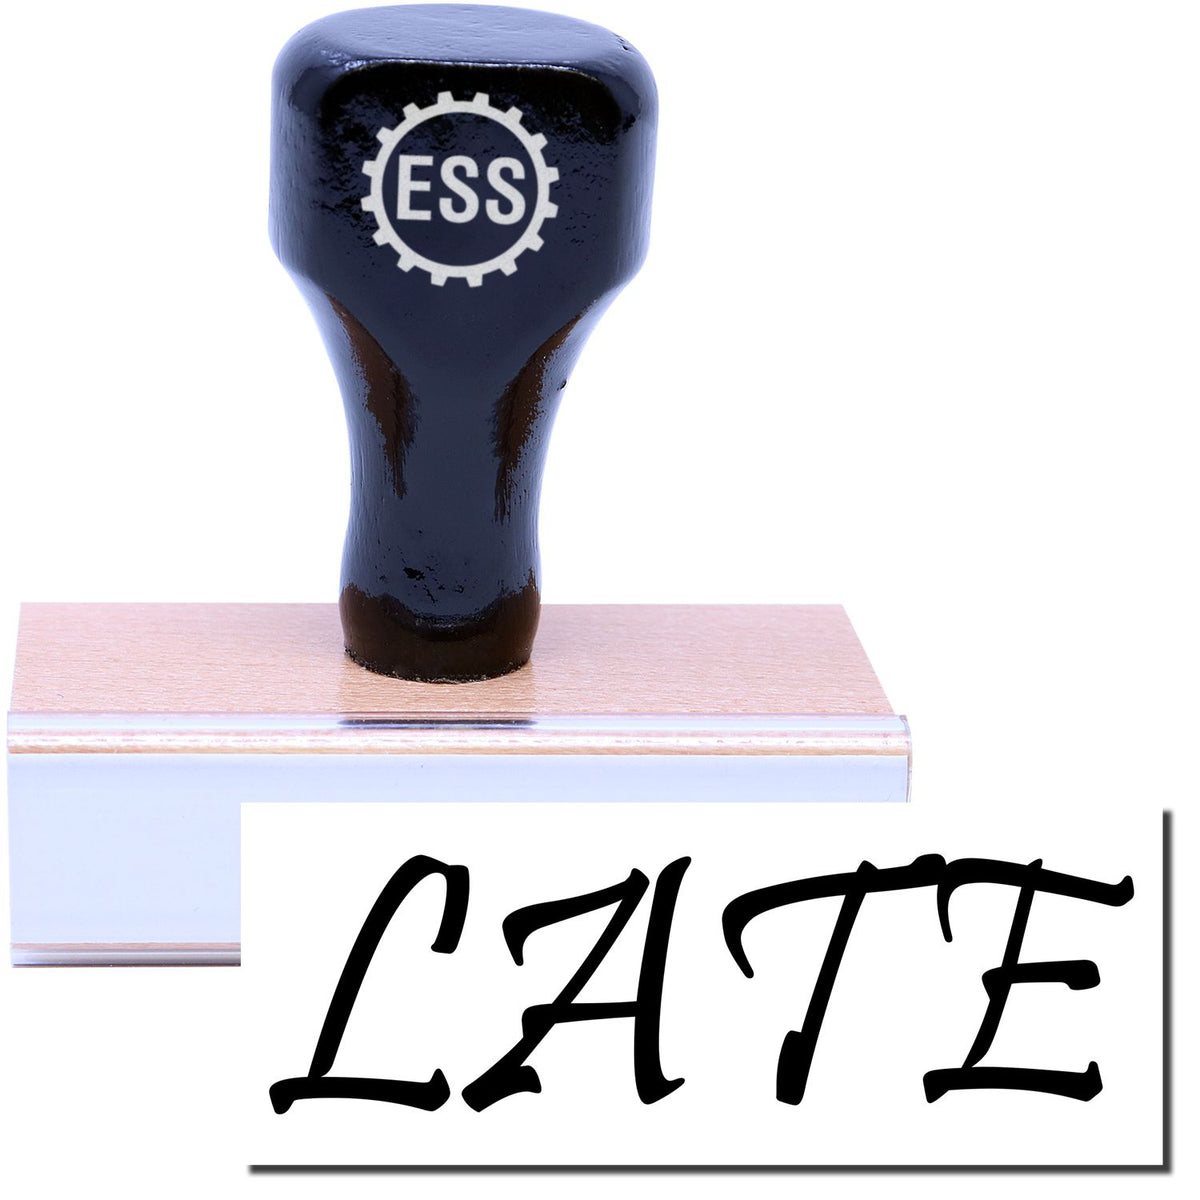 A stock office rubber stamp with a stamped image showing how the text &quot;LATE&quot; is displayed after stamping.